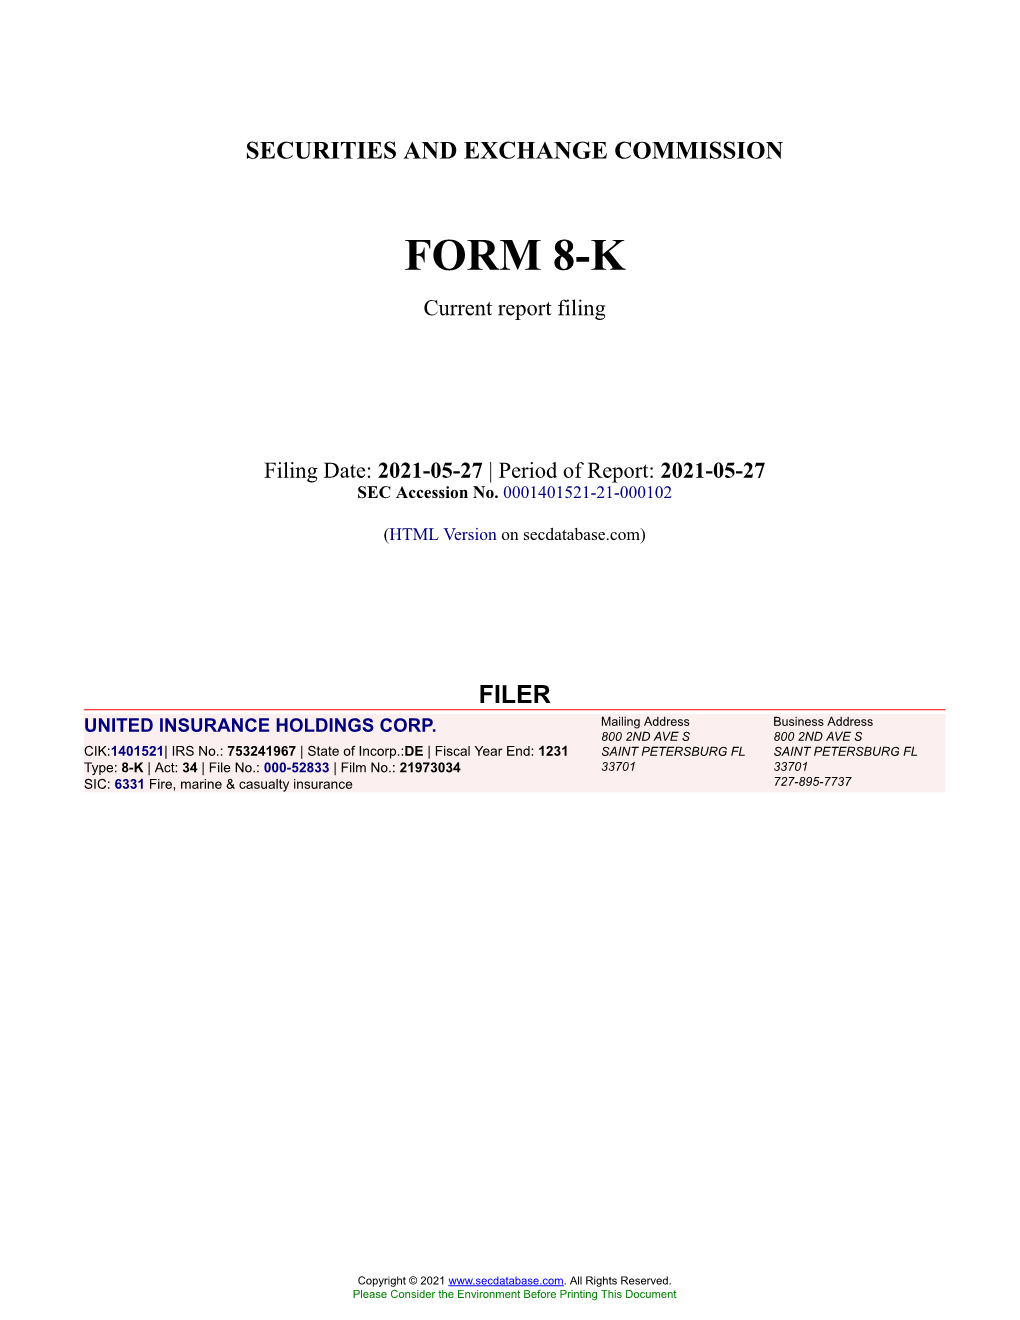 UNITED INSURANCE HOLDINGS CORP. Form 8-K Current Event